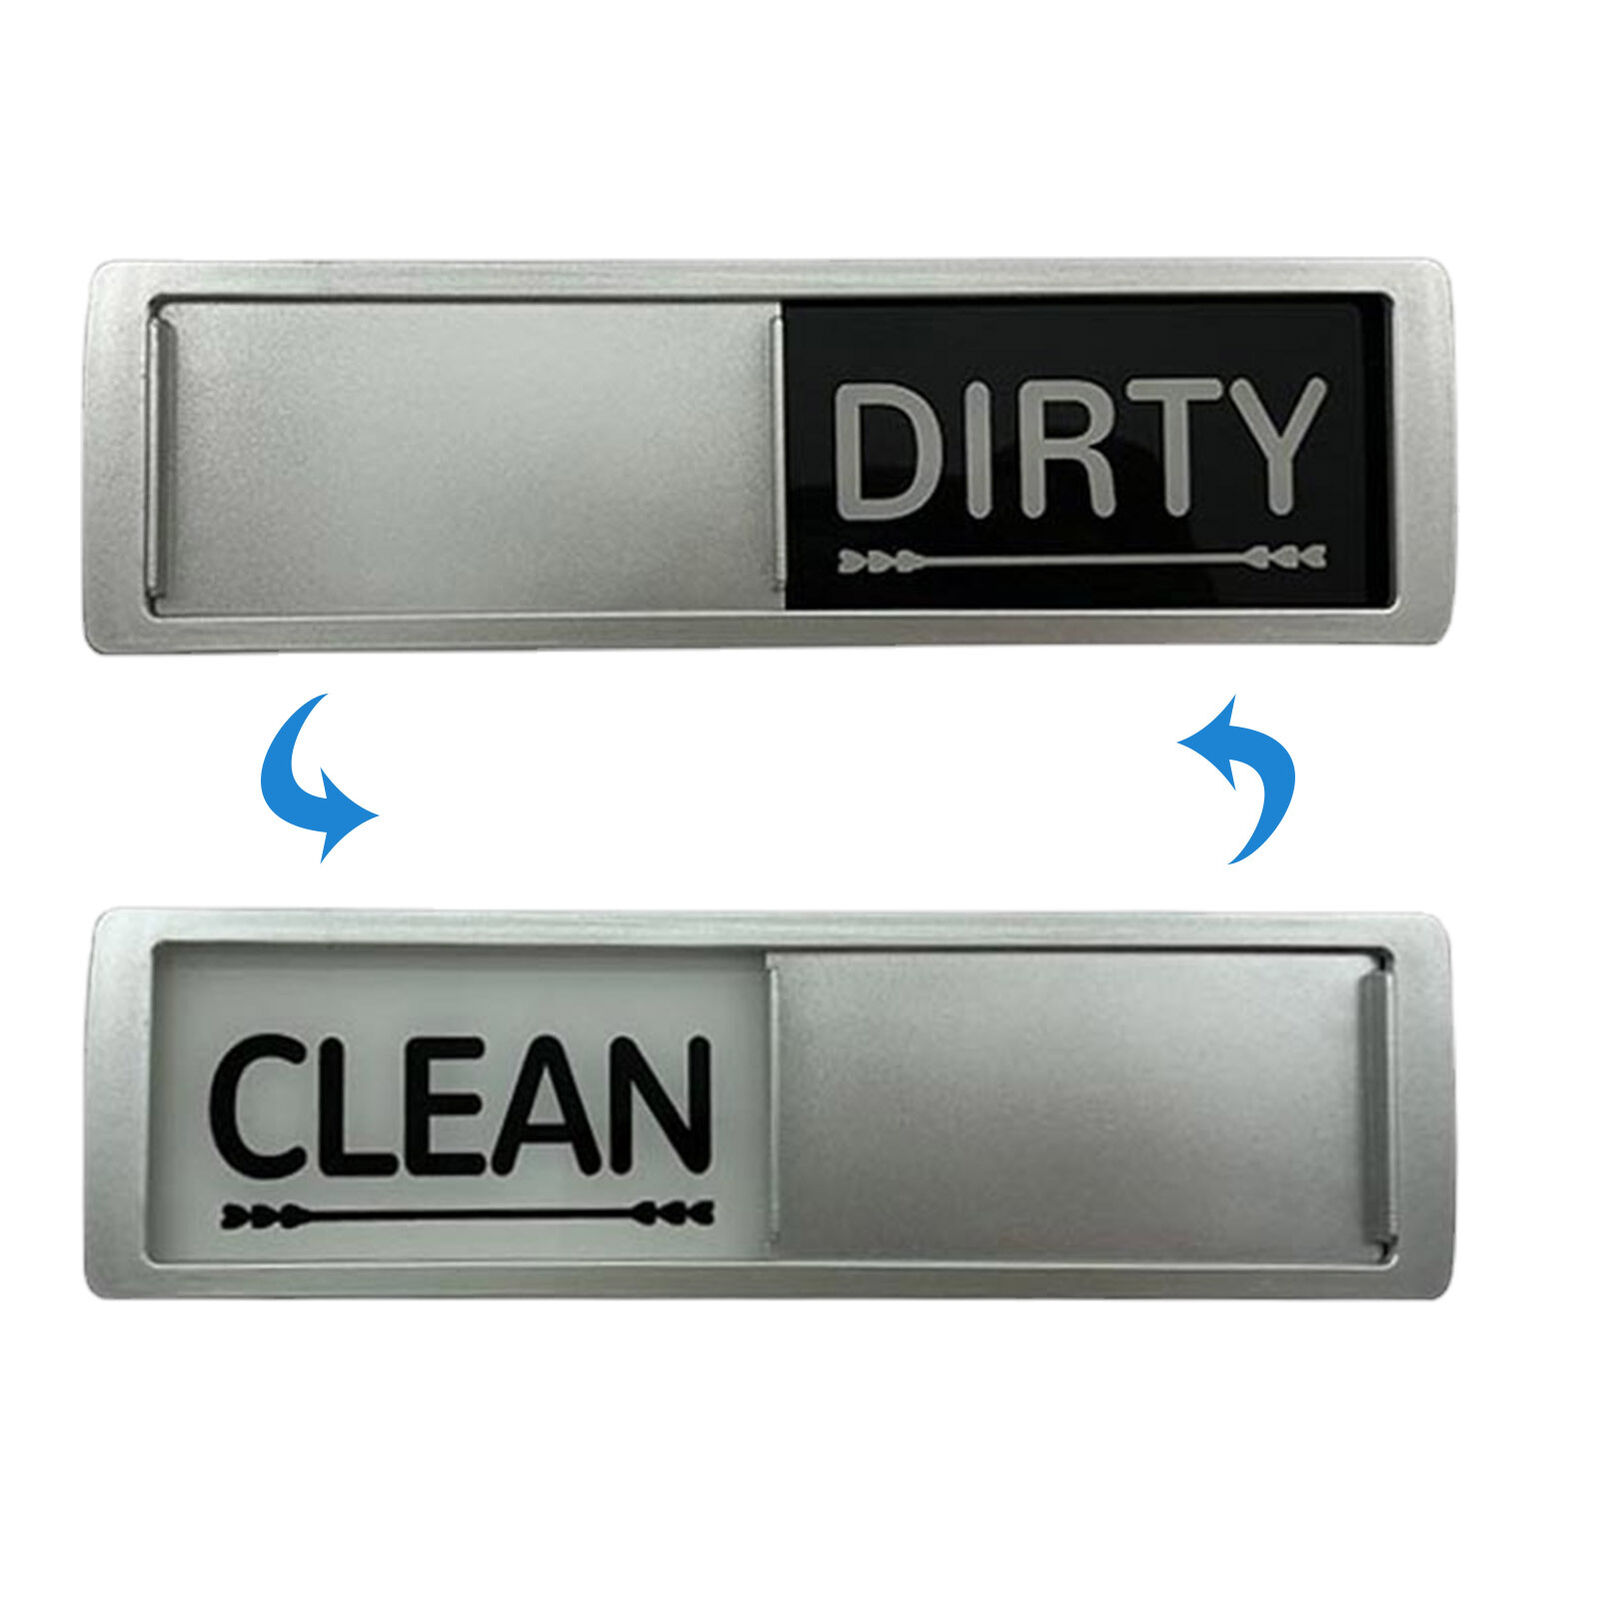 Clean / Dirty Dishwasher Magnet - Glossy Waterproof Magnet 